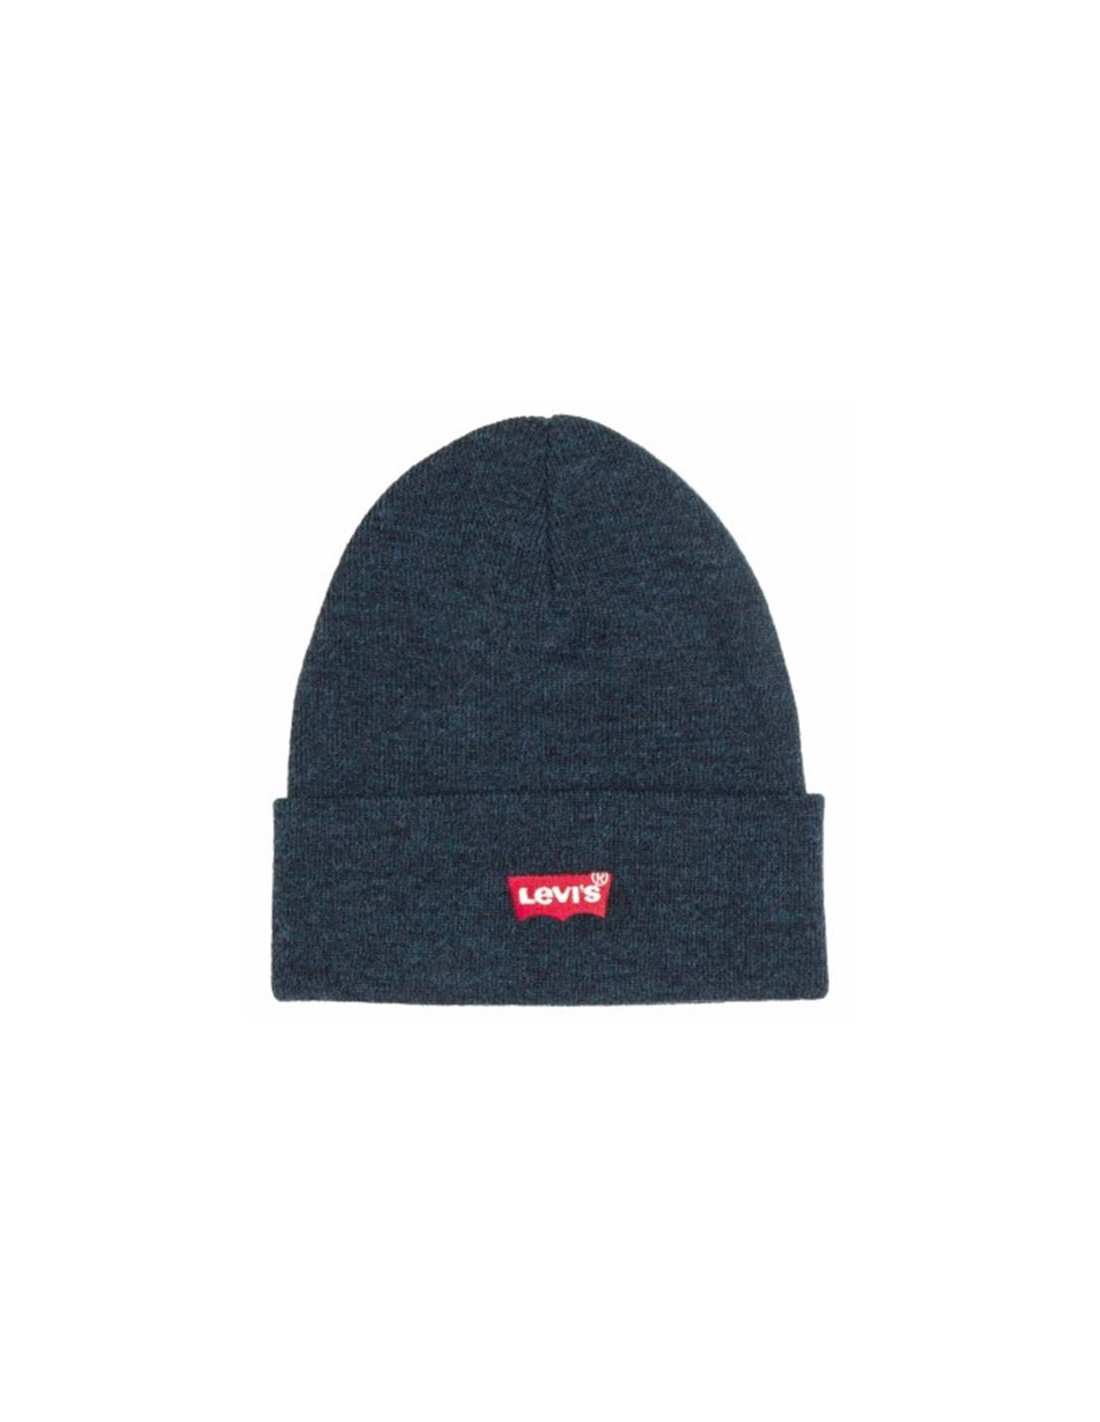 Gorro levi's red batwing embroidered beanie navy blue product